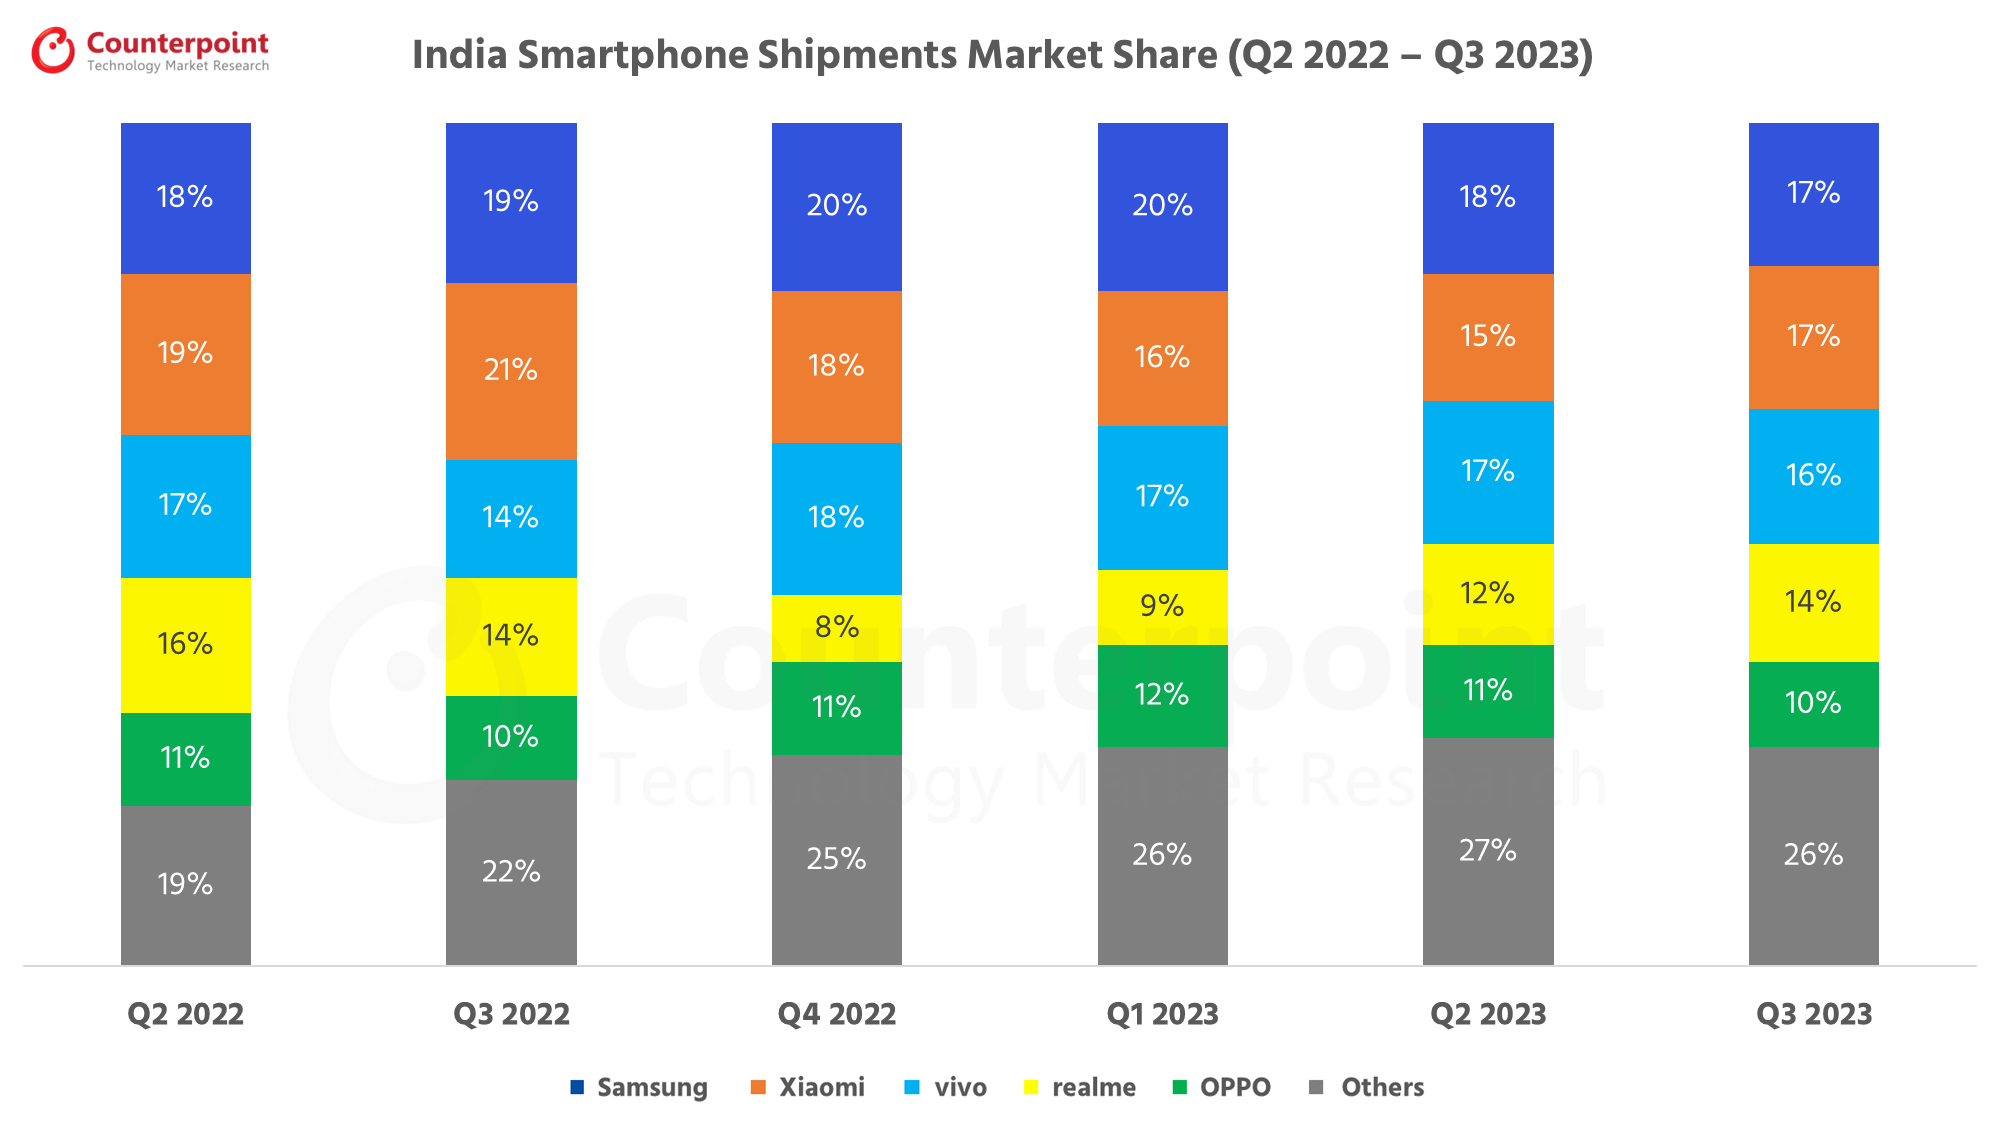 Counterpoint Research India Smartphone Market Share Q3 2023